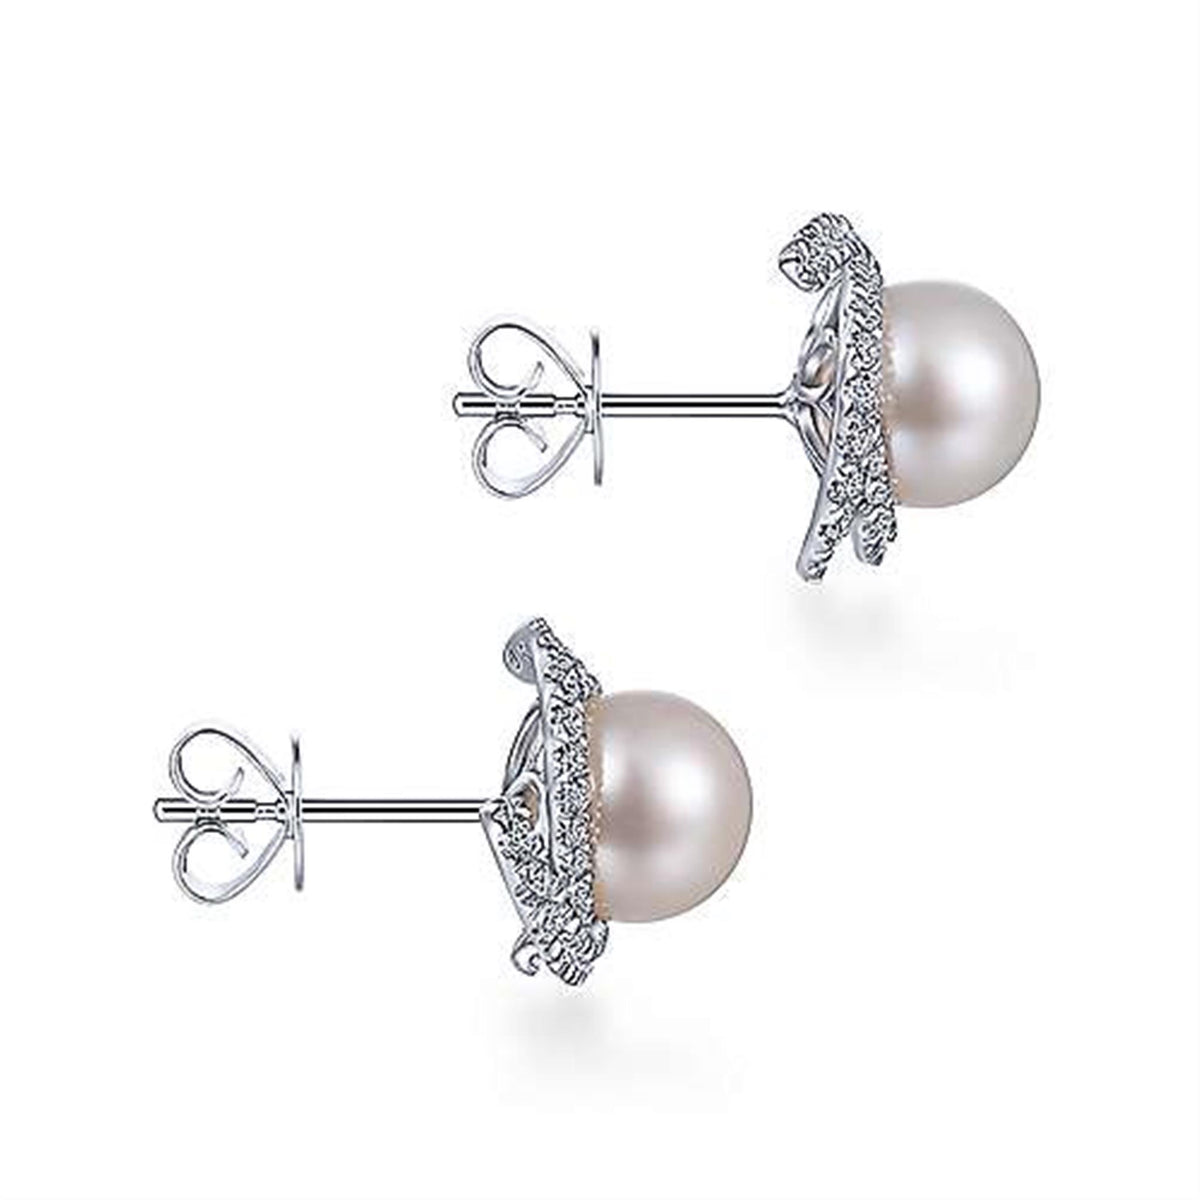 14Kt White Gold Halo Earrings With mm Round Cultured Pearl